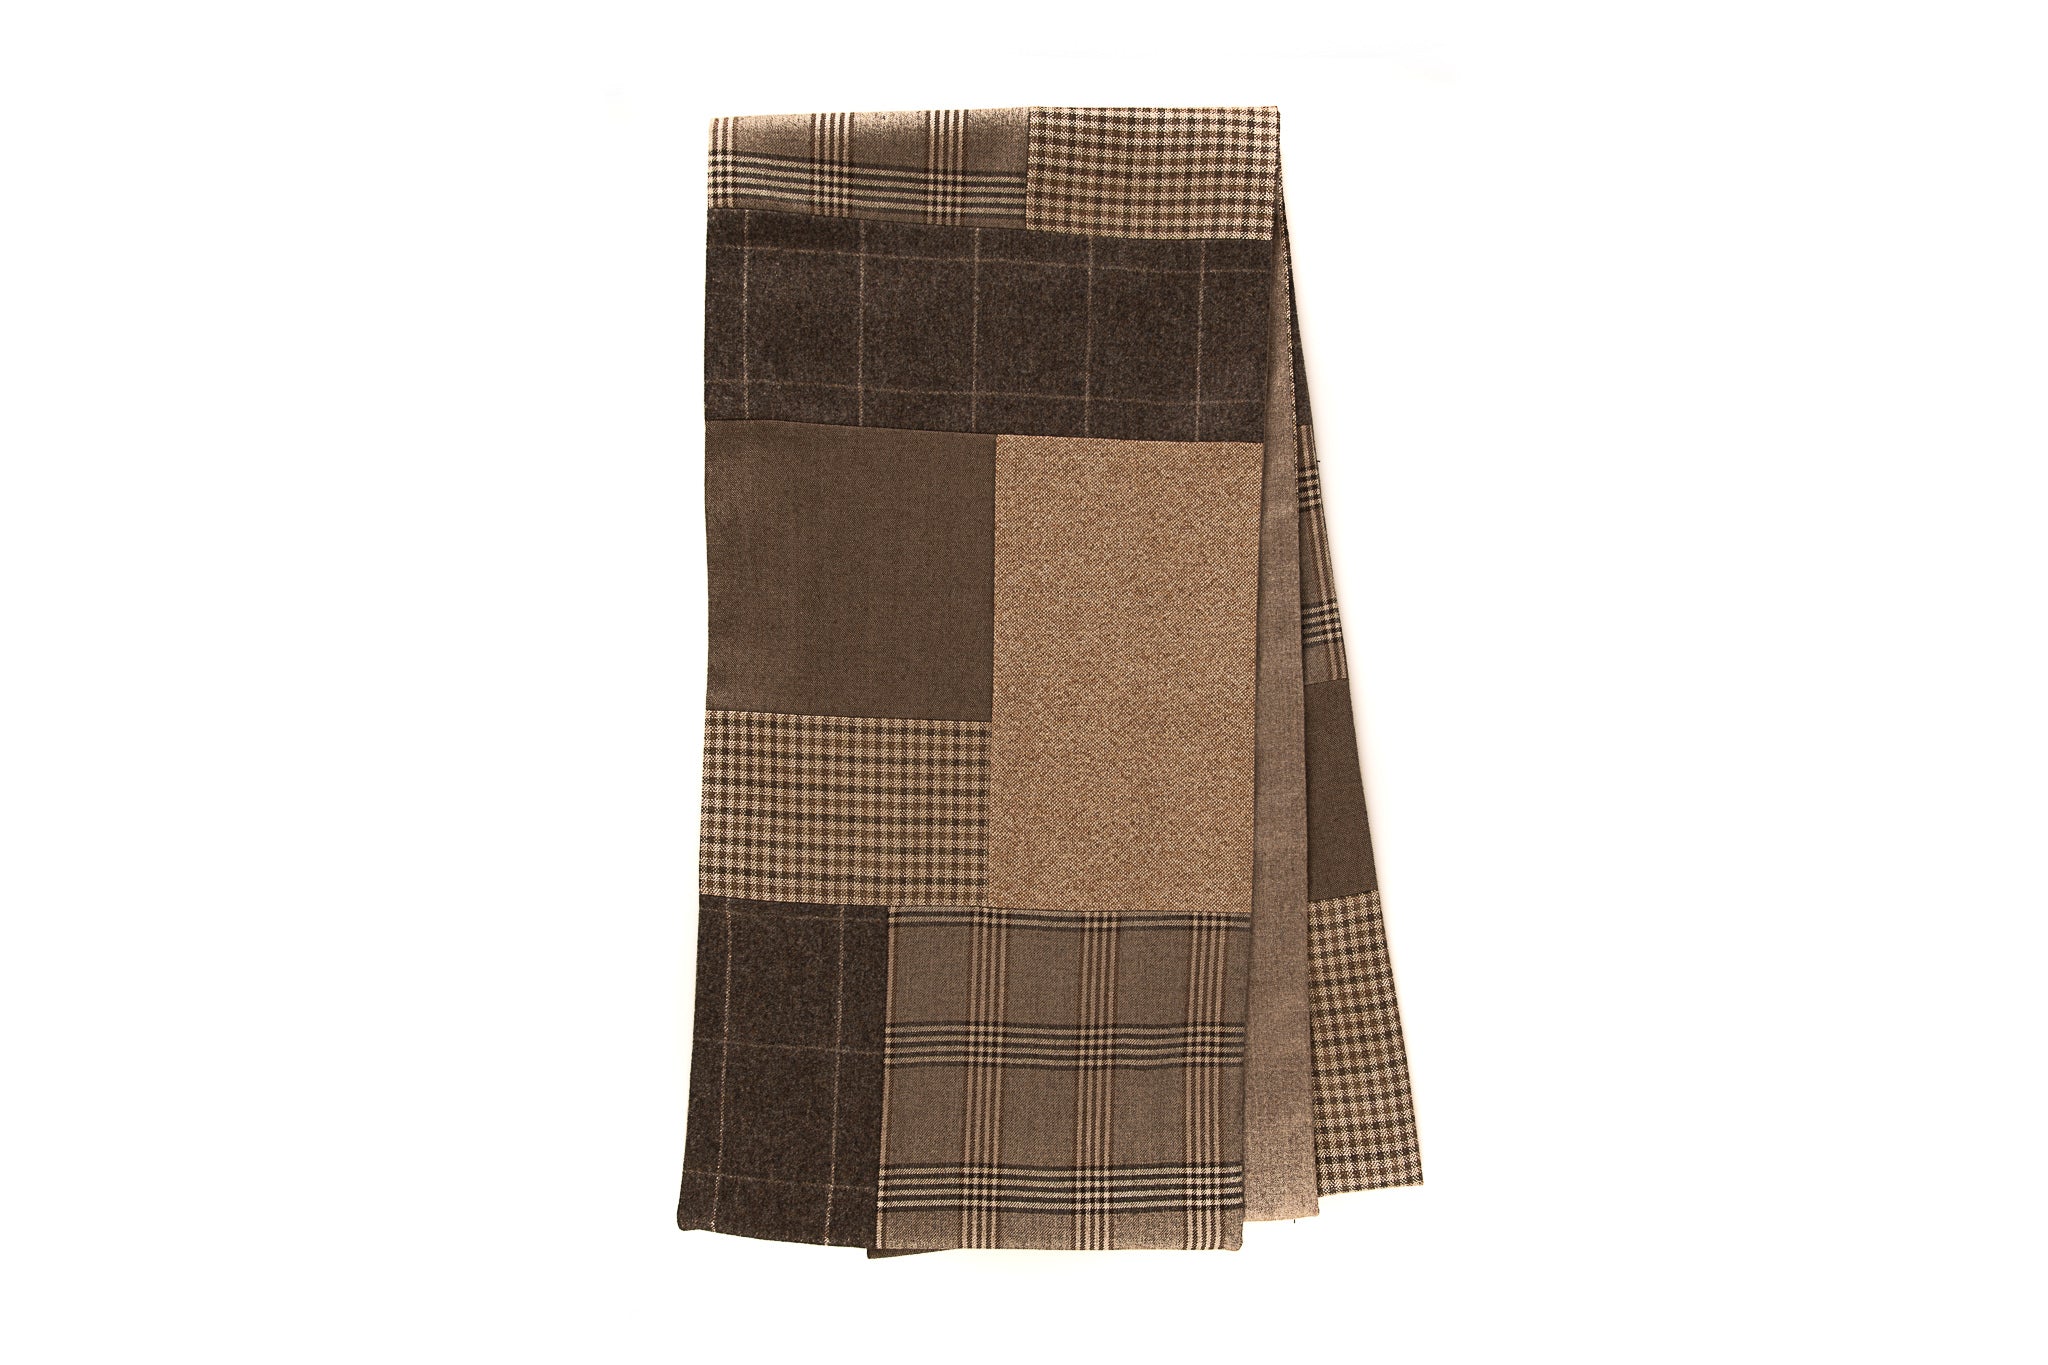 Geometric patchwork scarf - Beige and brown